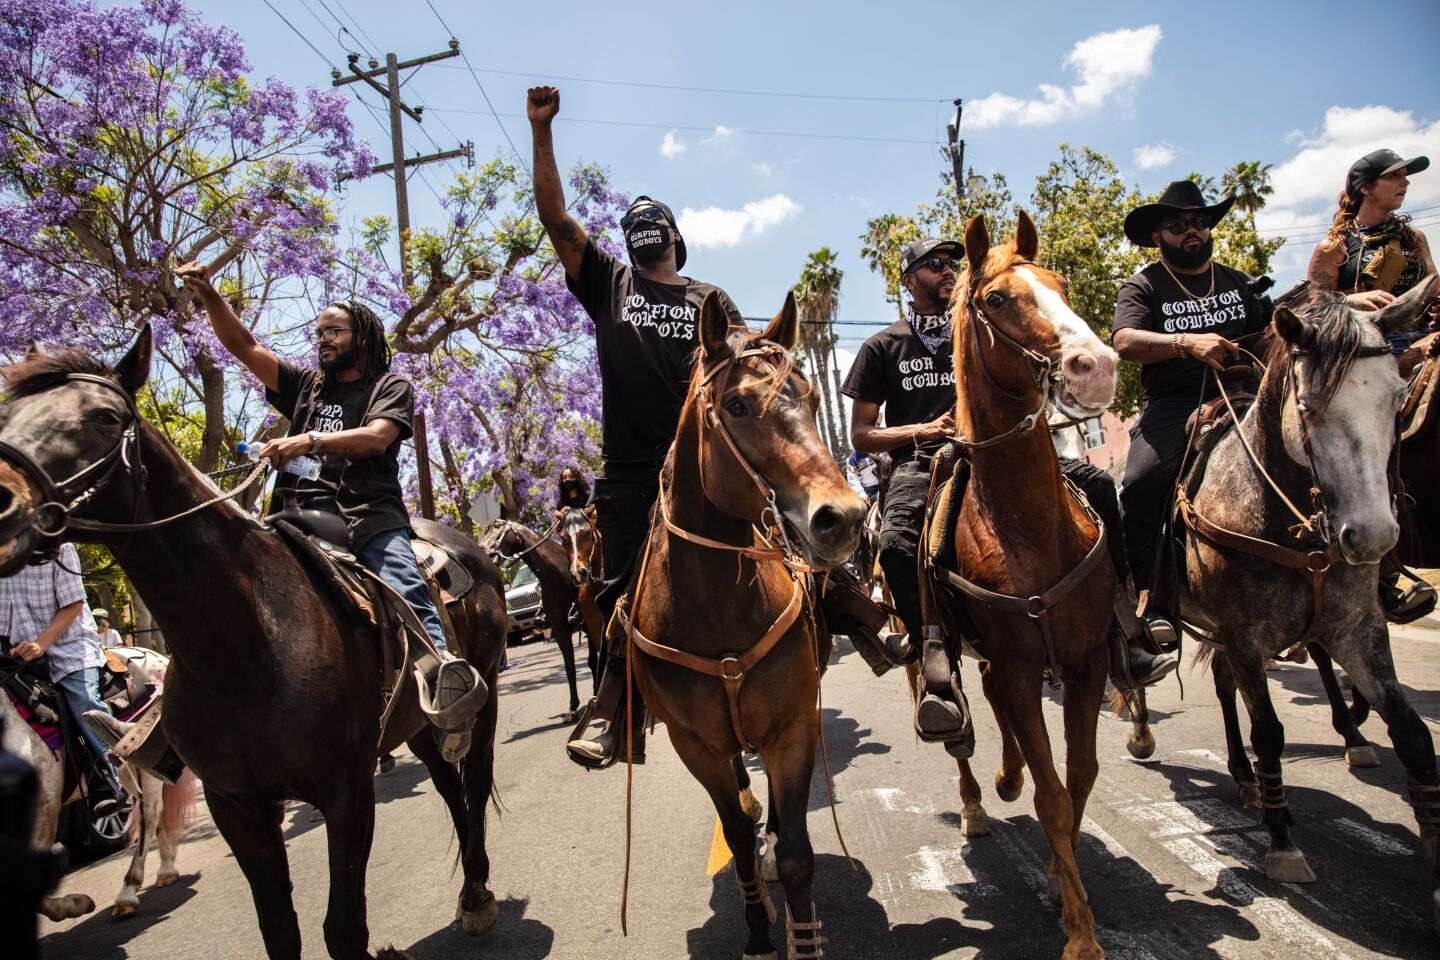 Compton Cowboys join protesters